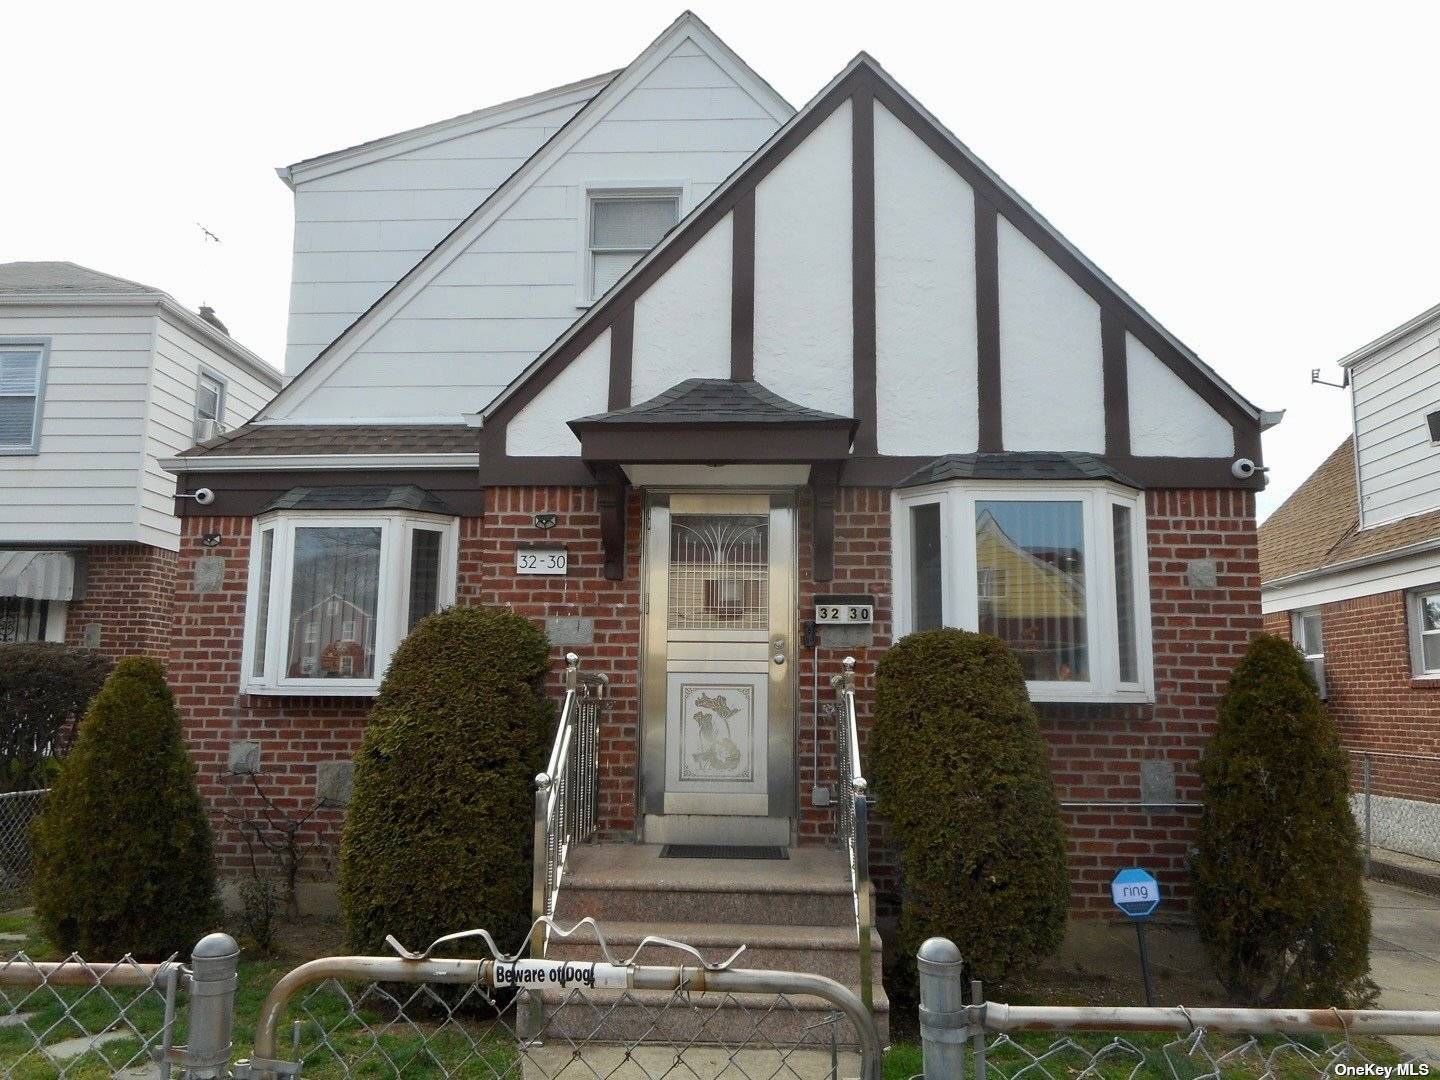 Large one family house in Nice North Flushing location, walkable to downtown Flushing, stores and supermarkets.